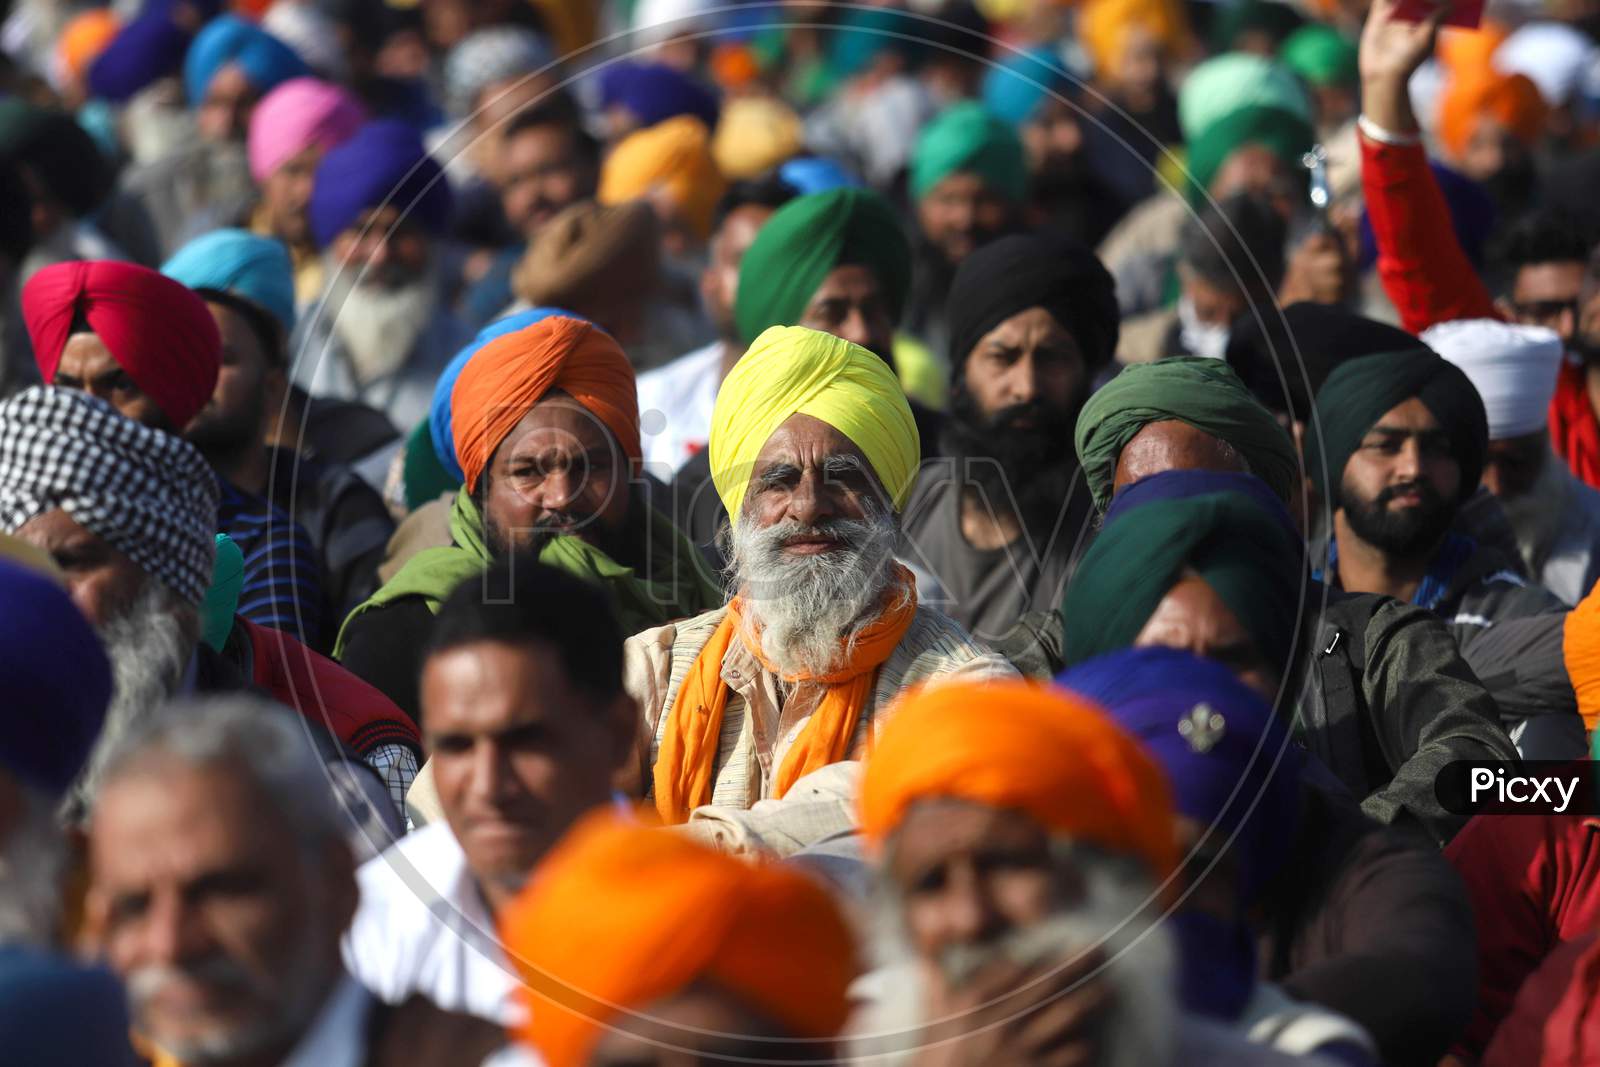 Farmers Listens To A Speaker Along A Blocked Highway During The Ongoing Sit-In Protest At Singhu Border Against New Farm Laws On December 13, 2020 Near New Delhi, India. Thousands Of Farmers Are Protesting On Various Borders Of The National Capital Since November 26.